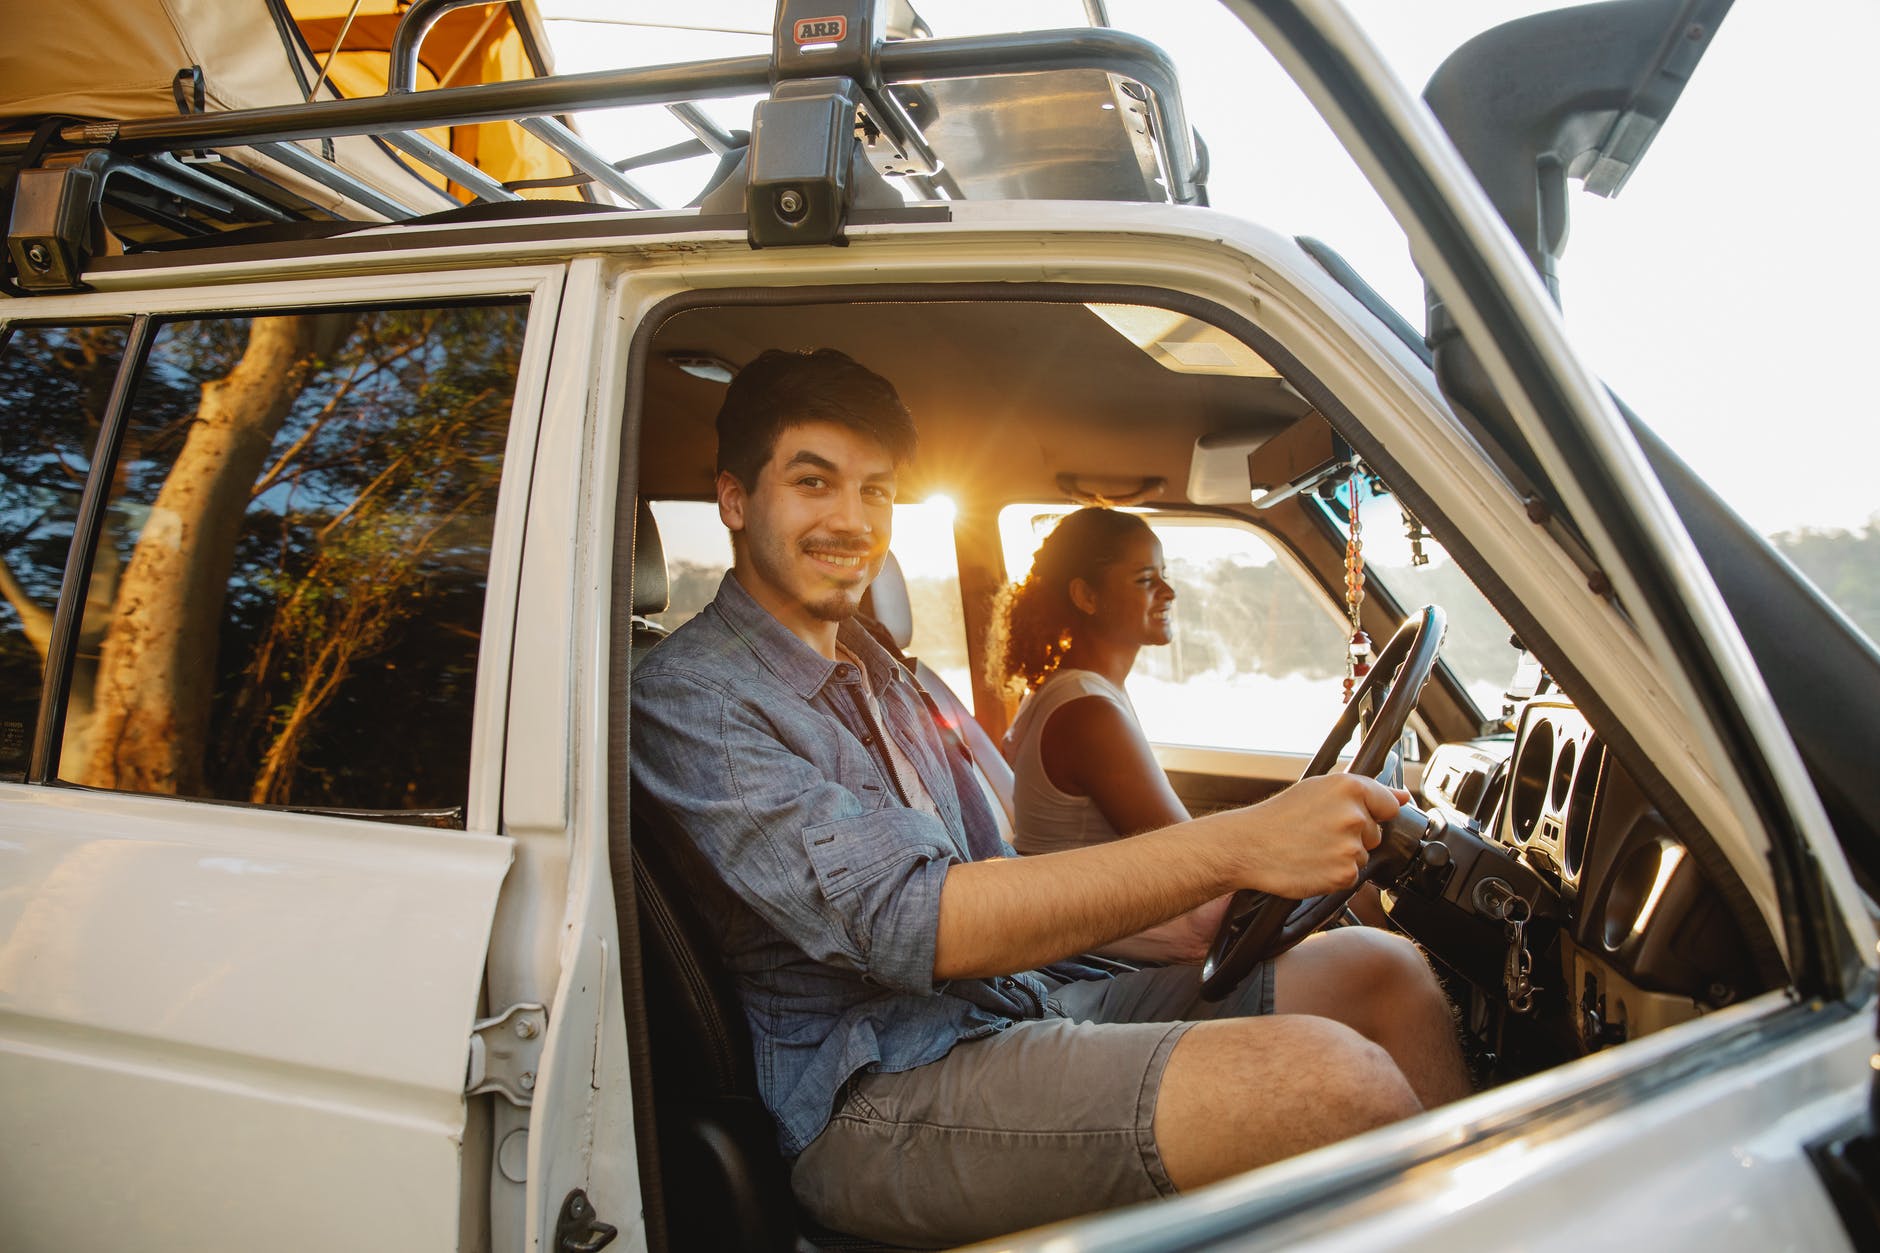 How To Plan A Memorable Road Trip With Your Spouse